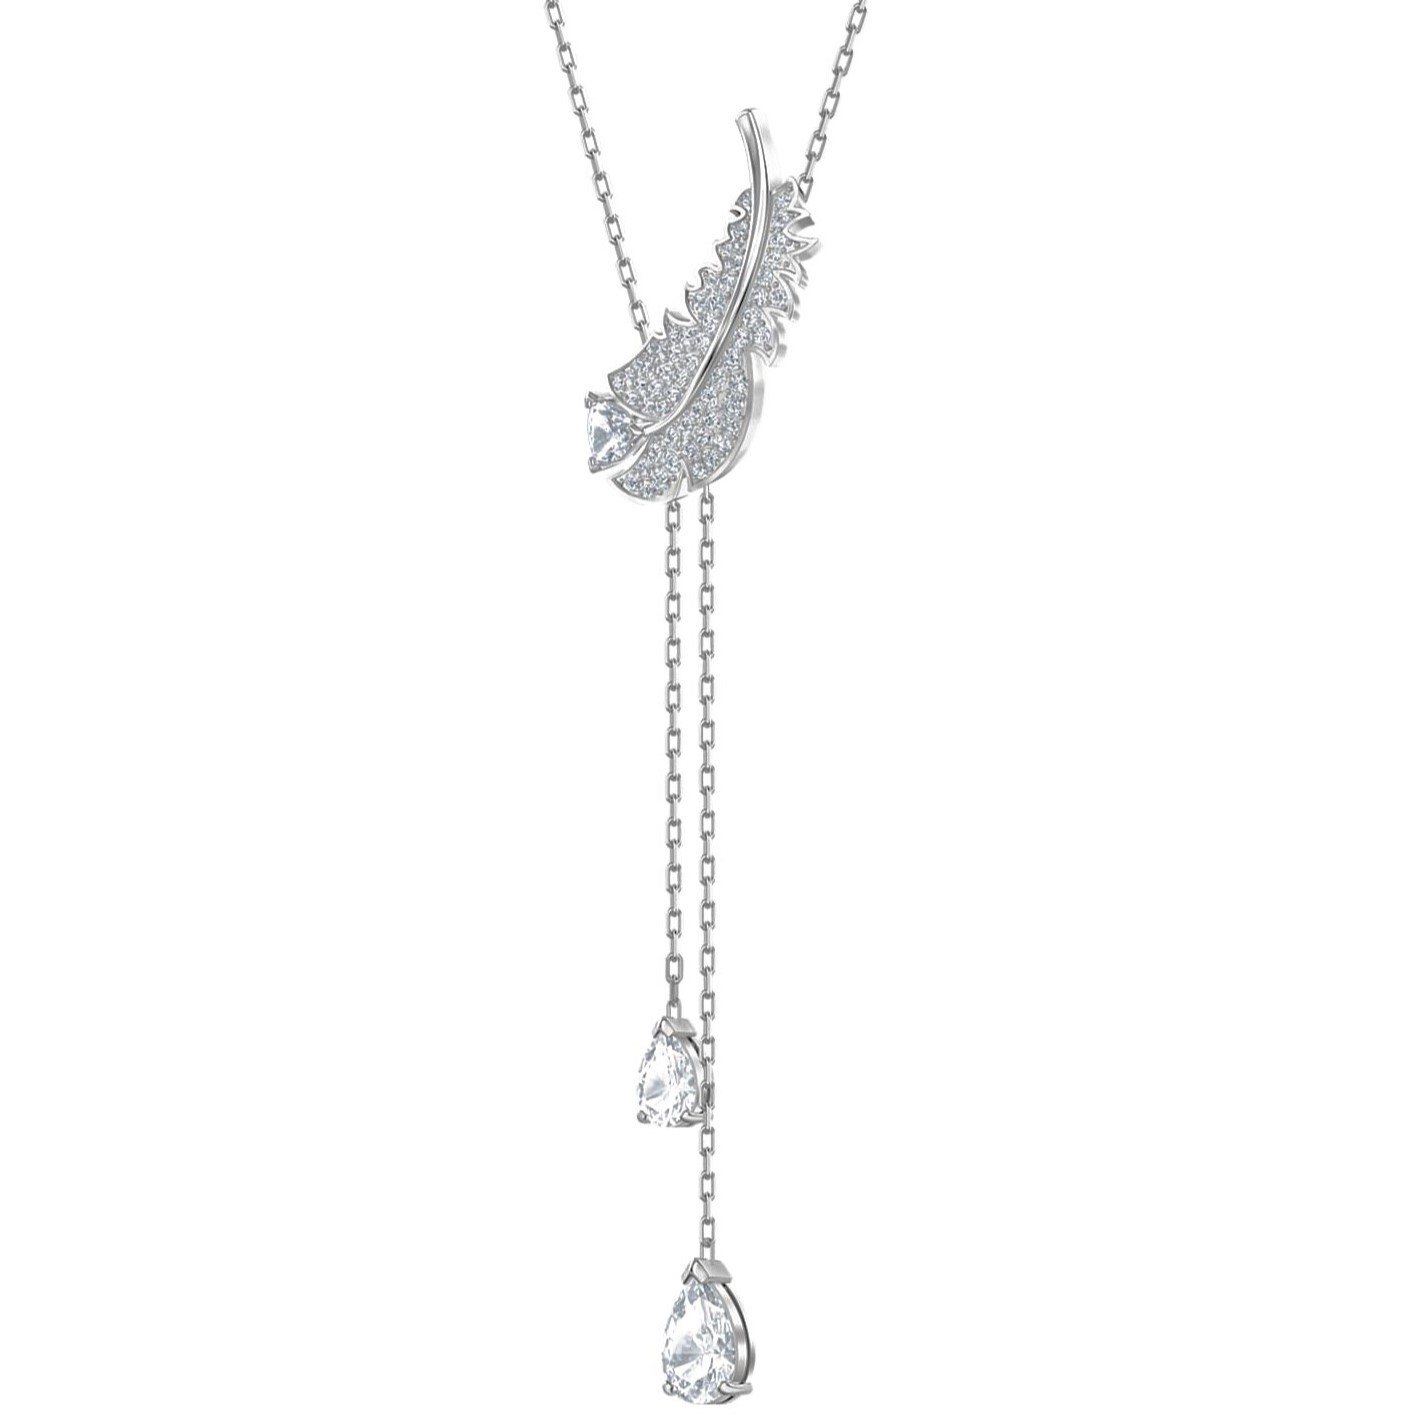 DÂY CHUYỀN SWAROVSKI LÔNG NGỖNG NICE Y NECKLACE WHITE RHODIUM PLATED 5493397 2